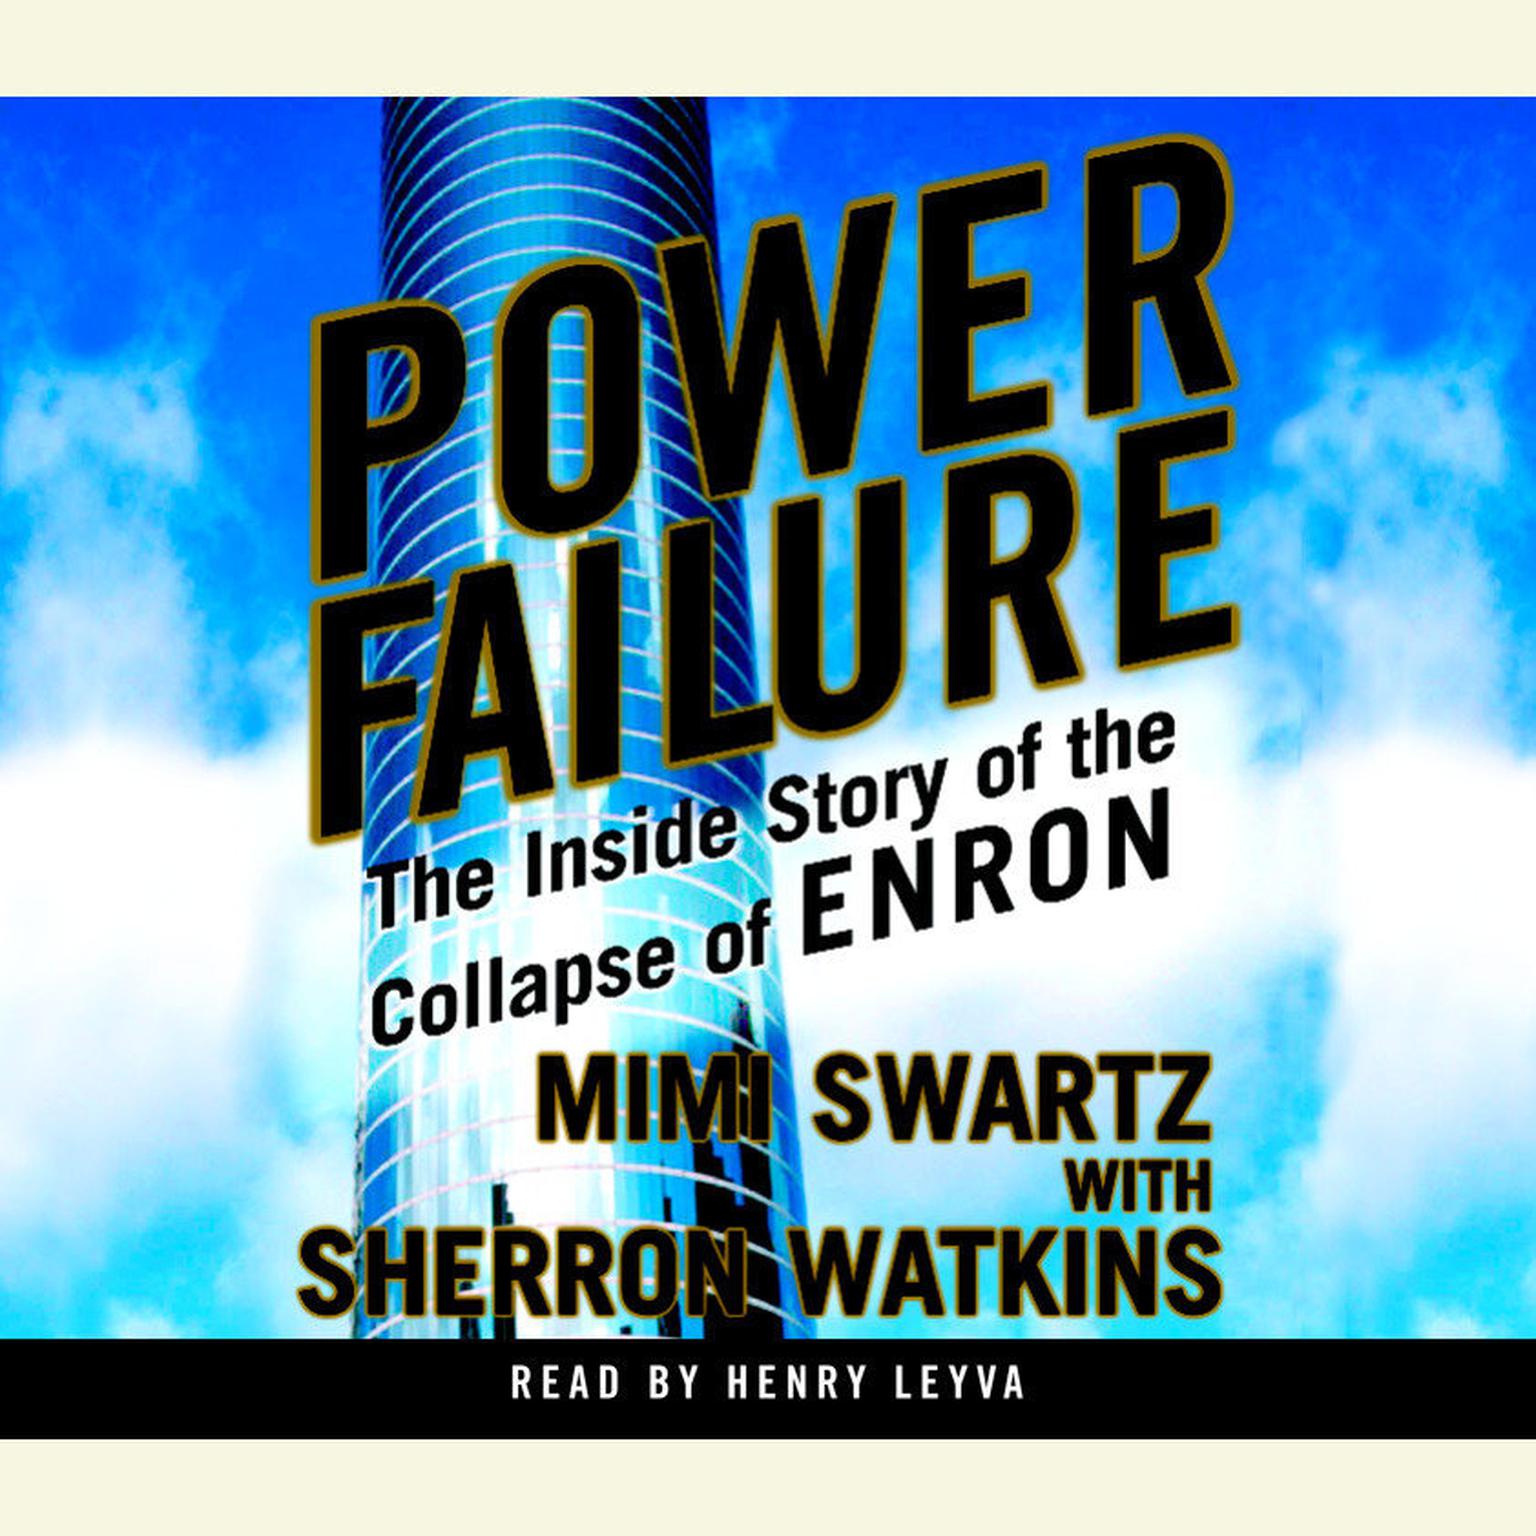 Power Failure (Abridged): The Inside Story of the Collapse of Enron Audiobook, by Mimi Swartz